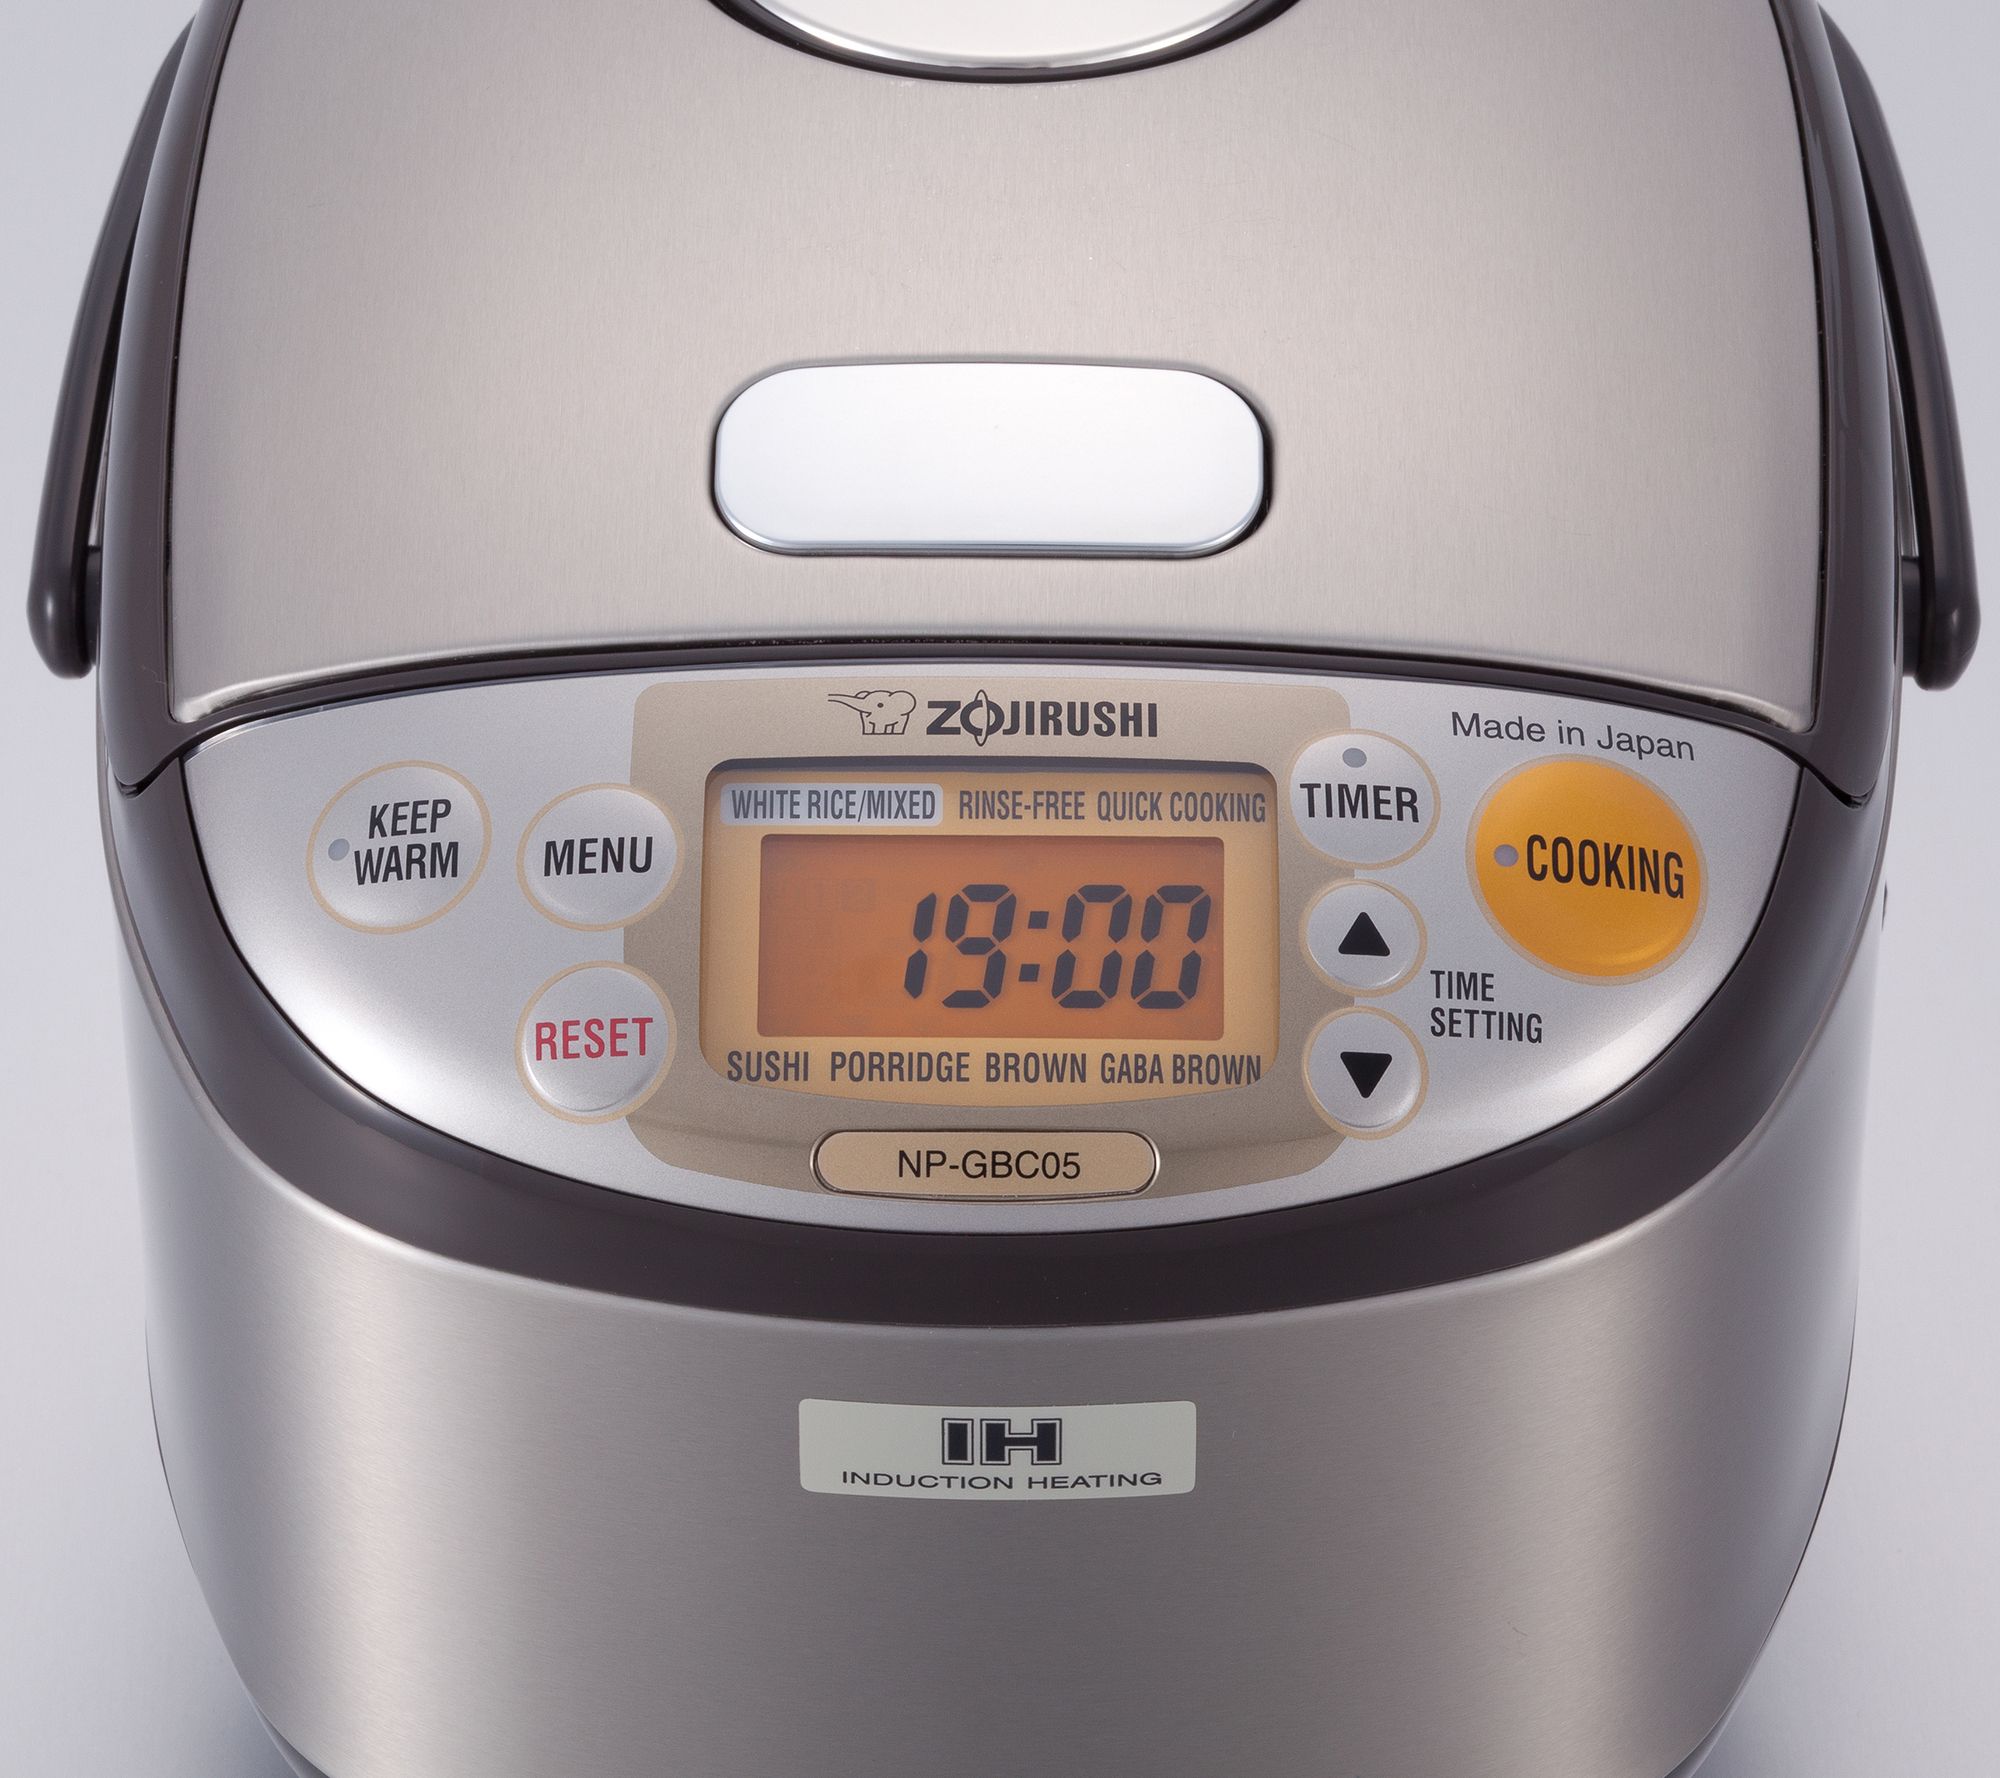 Zojirushi 3 Cup Induction Rice Cooker - QVC.com